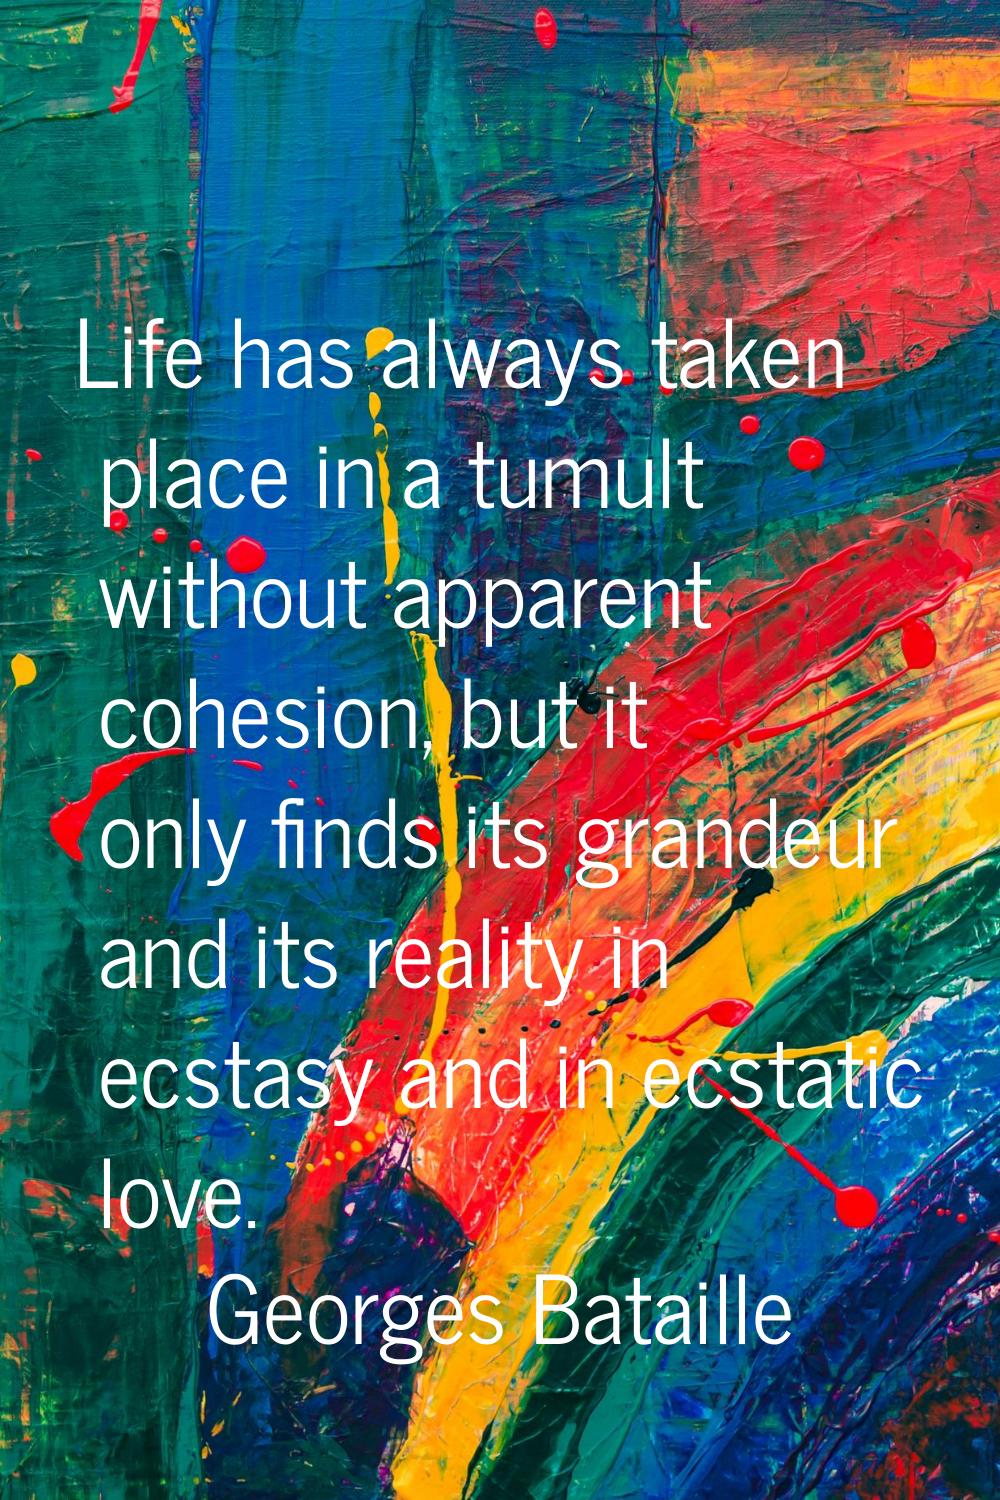 Life has always taken place in a tumult without apparent cohesion, but it only finds its grandeur a